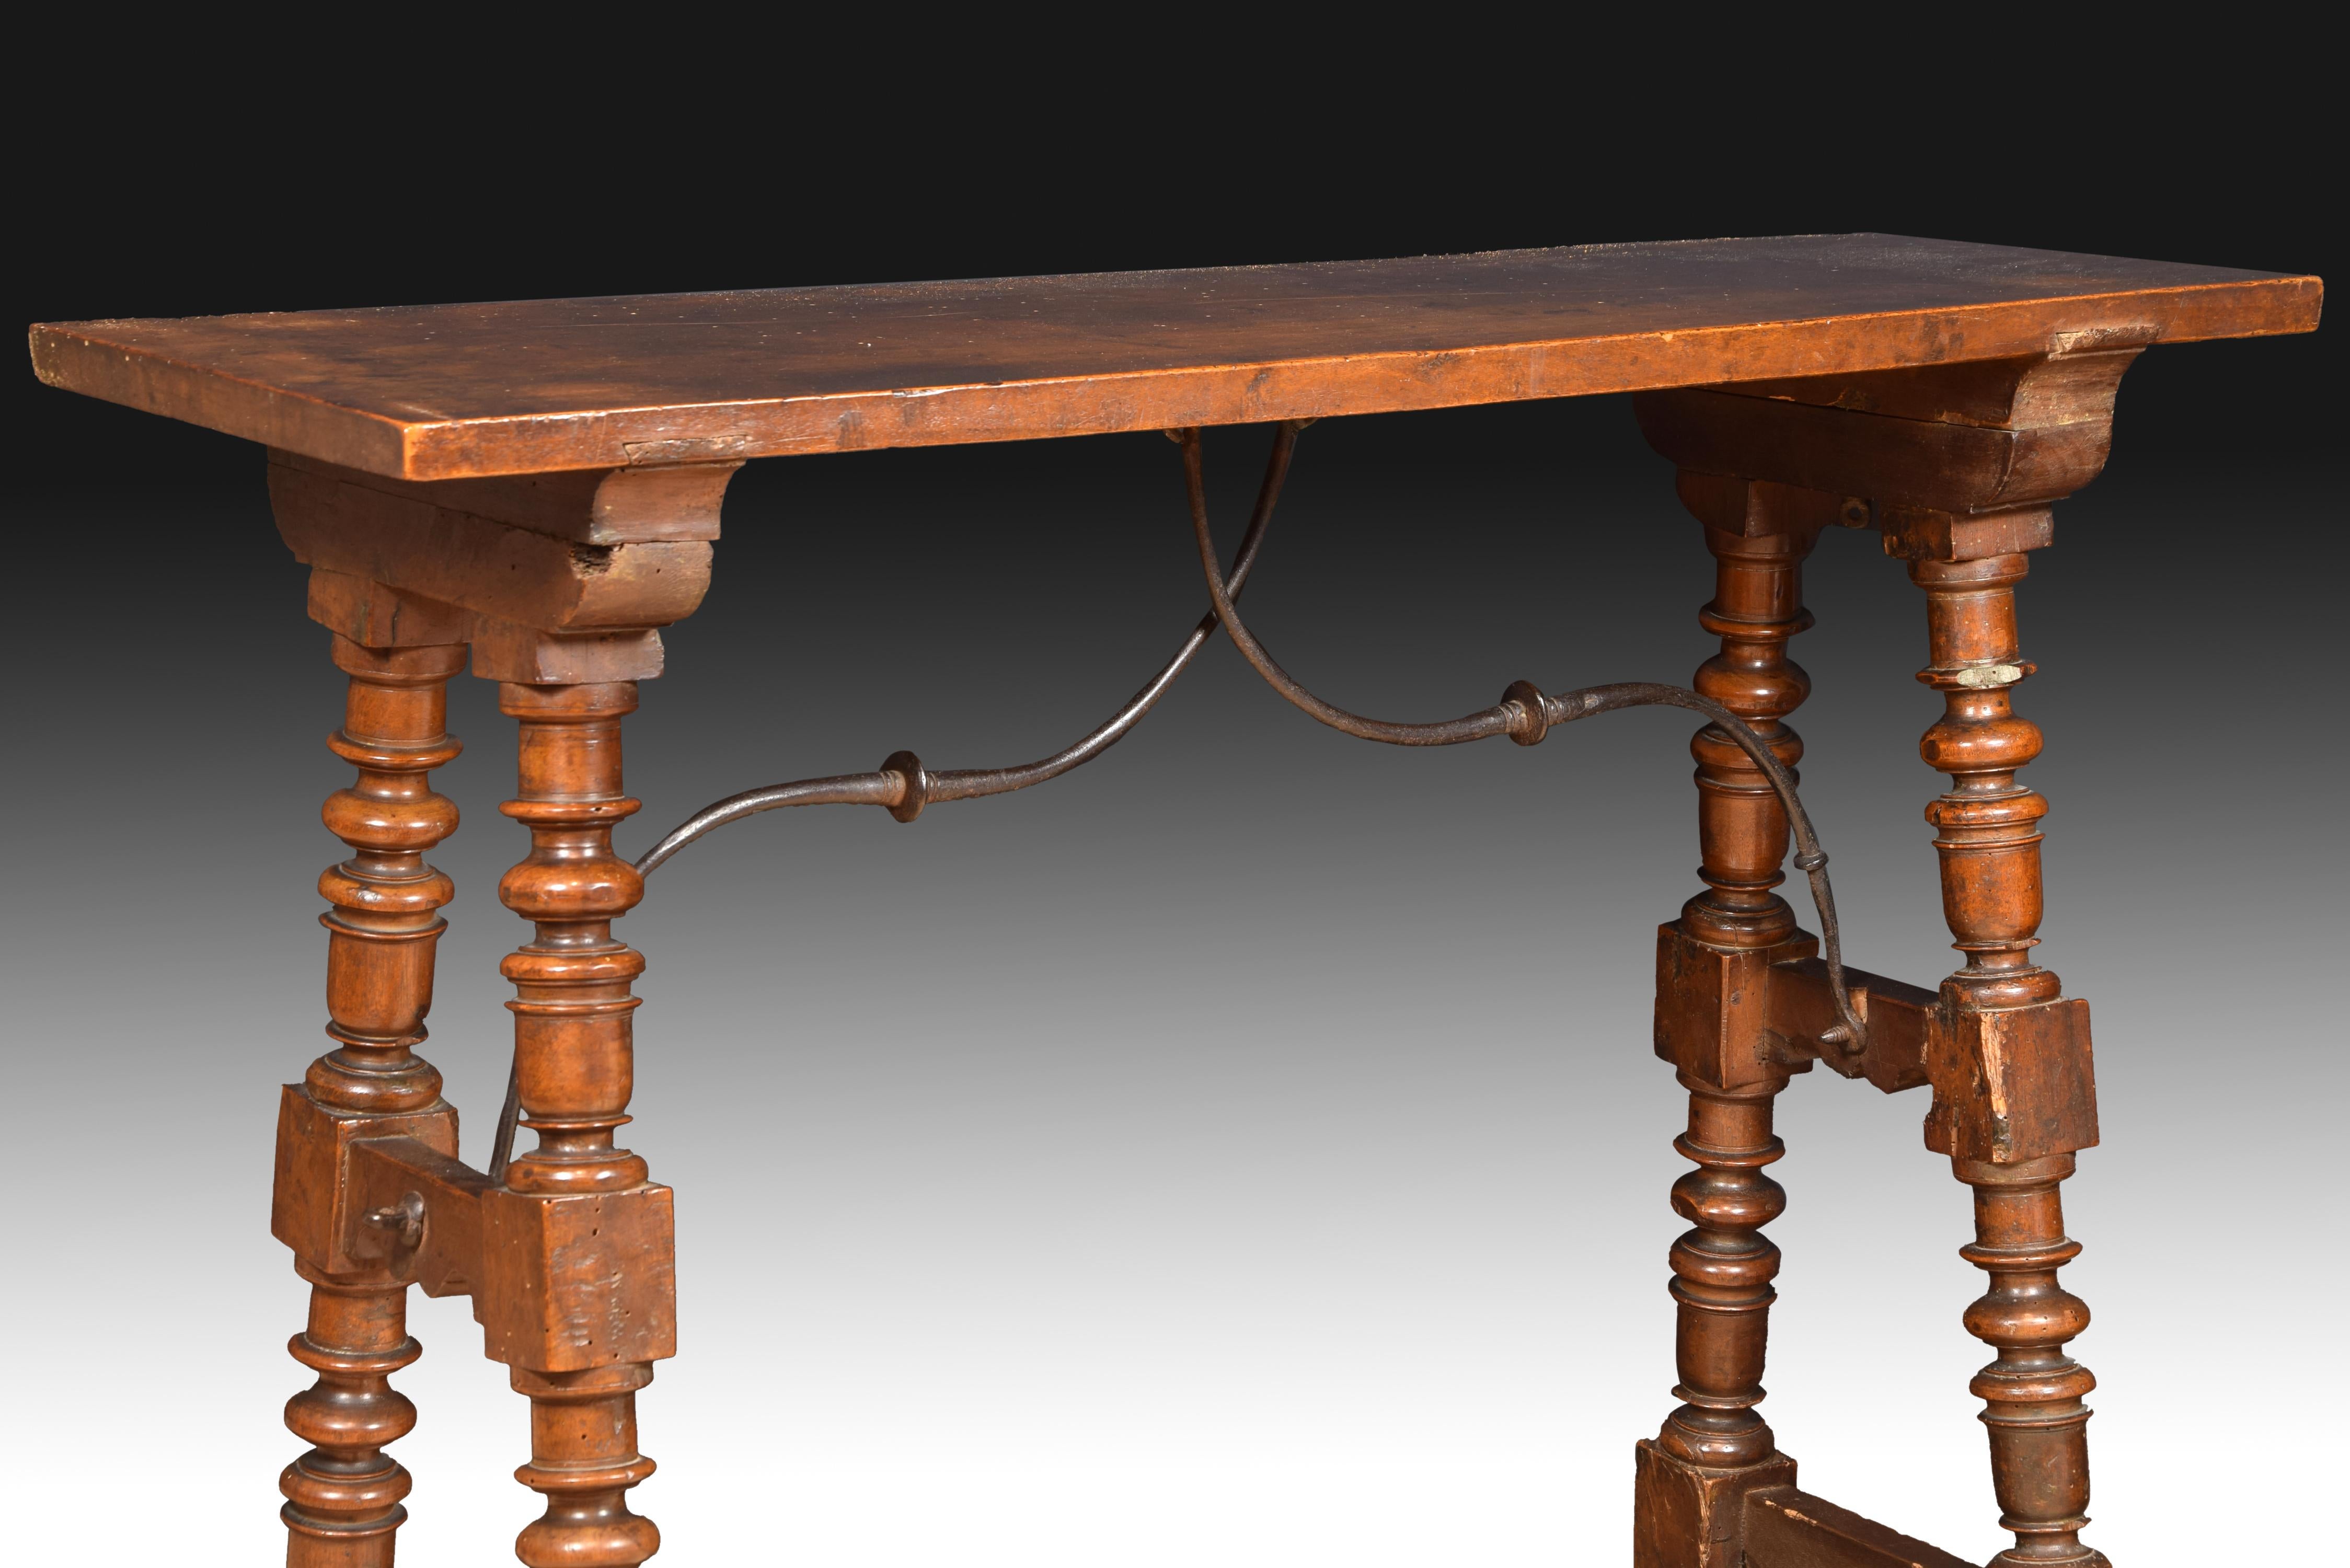 Paws turned together with double chambrana are secured to the table top with curved wrought iron fasteners. This type of furniture was made to support and display bins or desks, for utilitarian objects that, however, were often decorated moderately